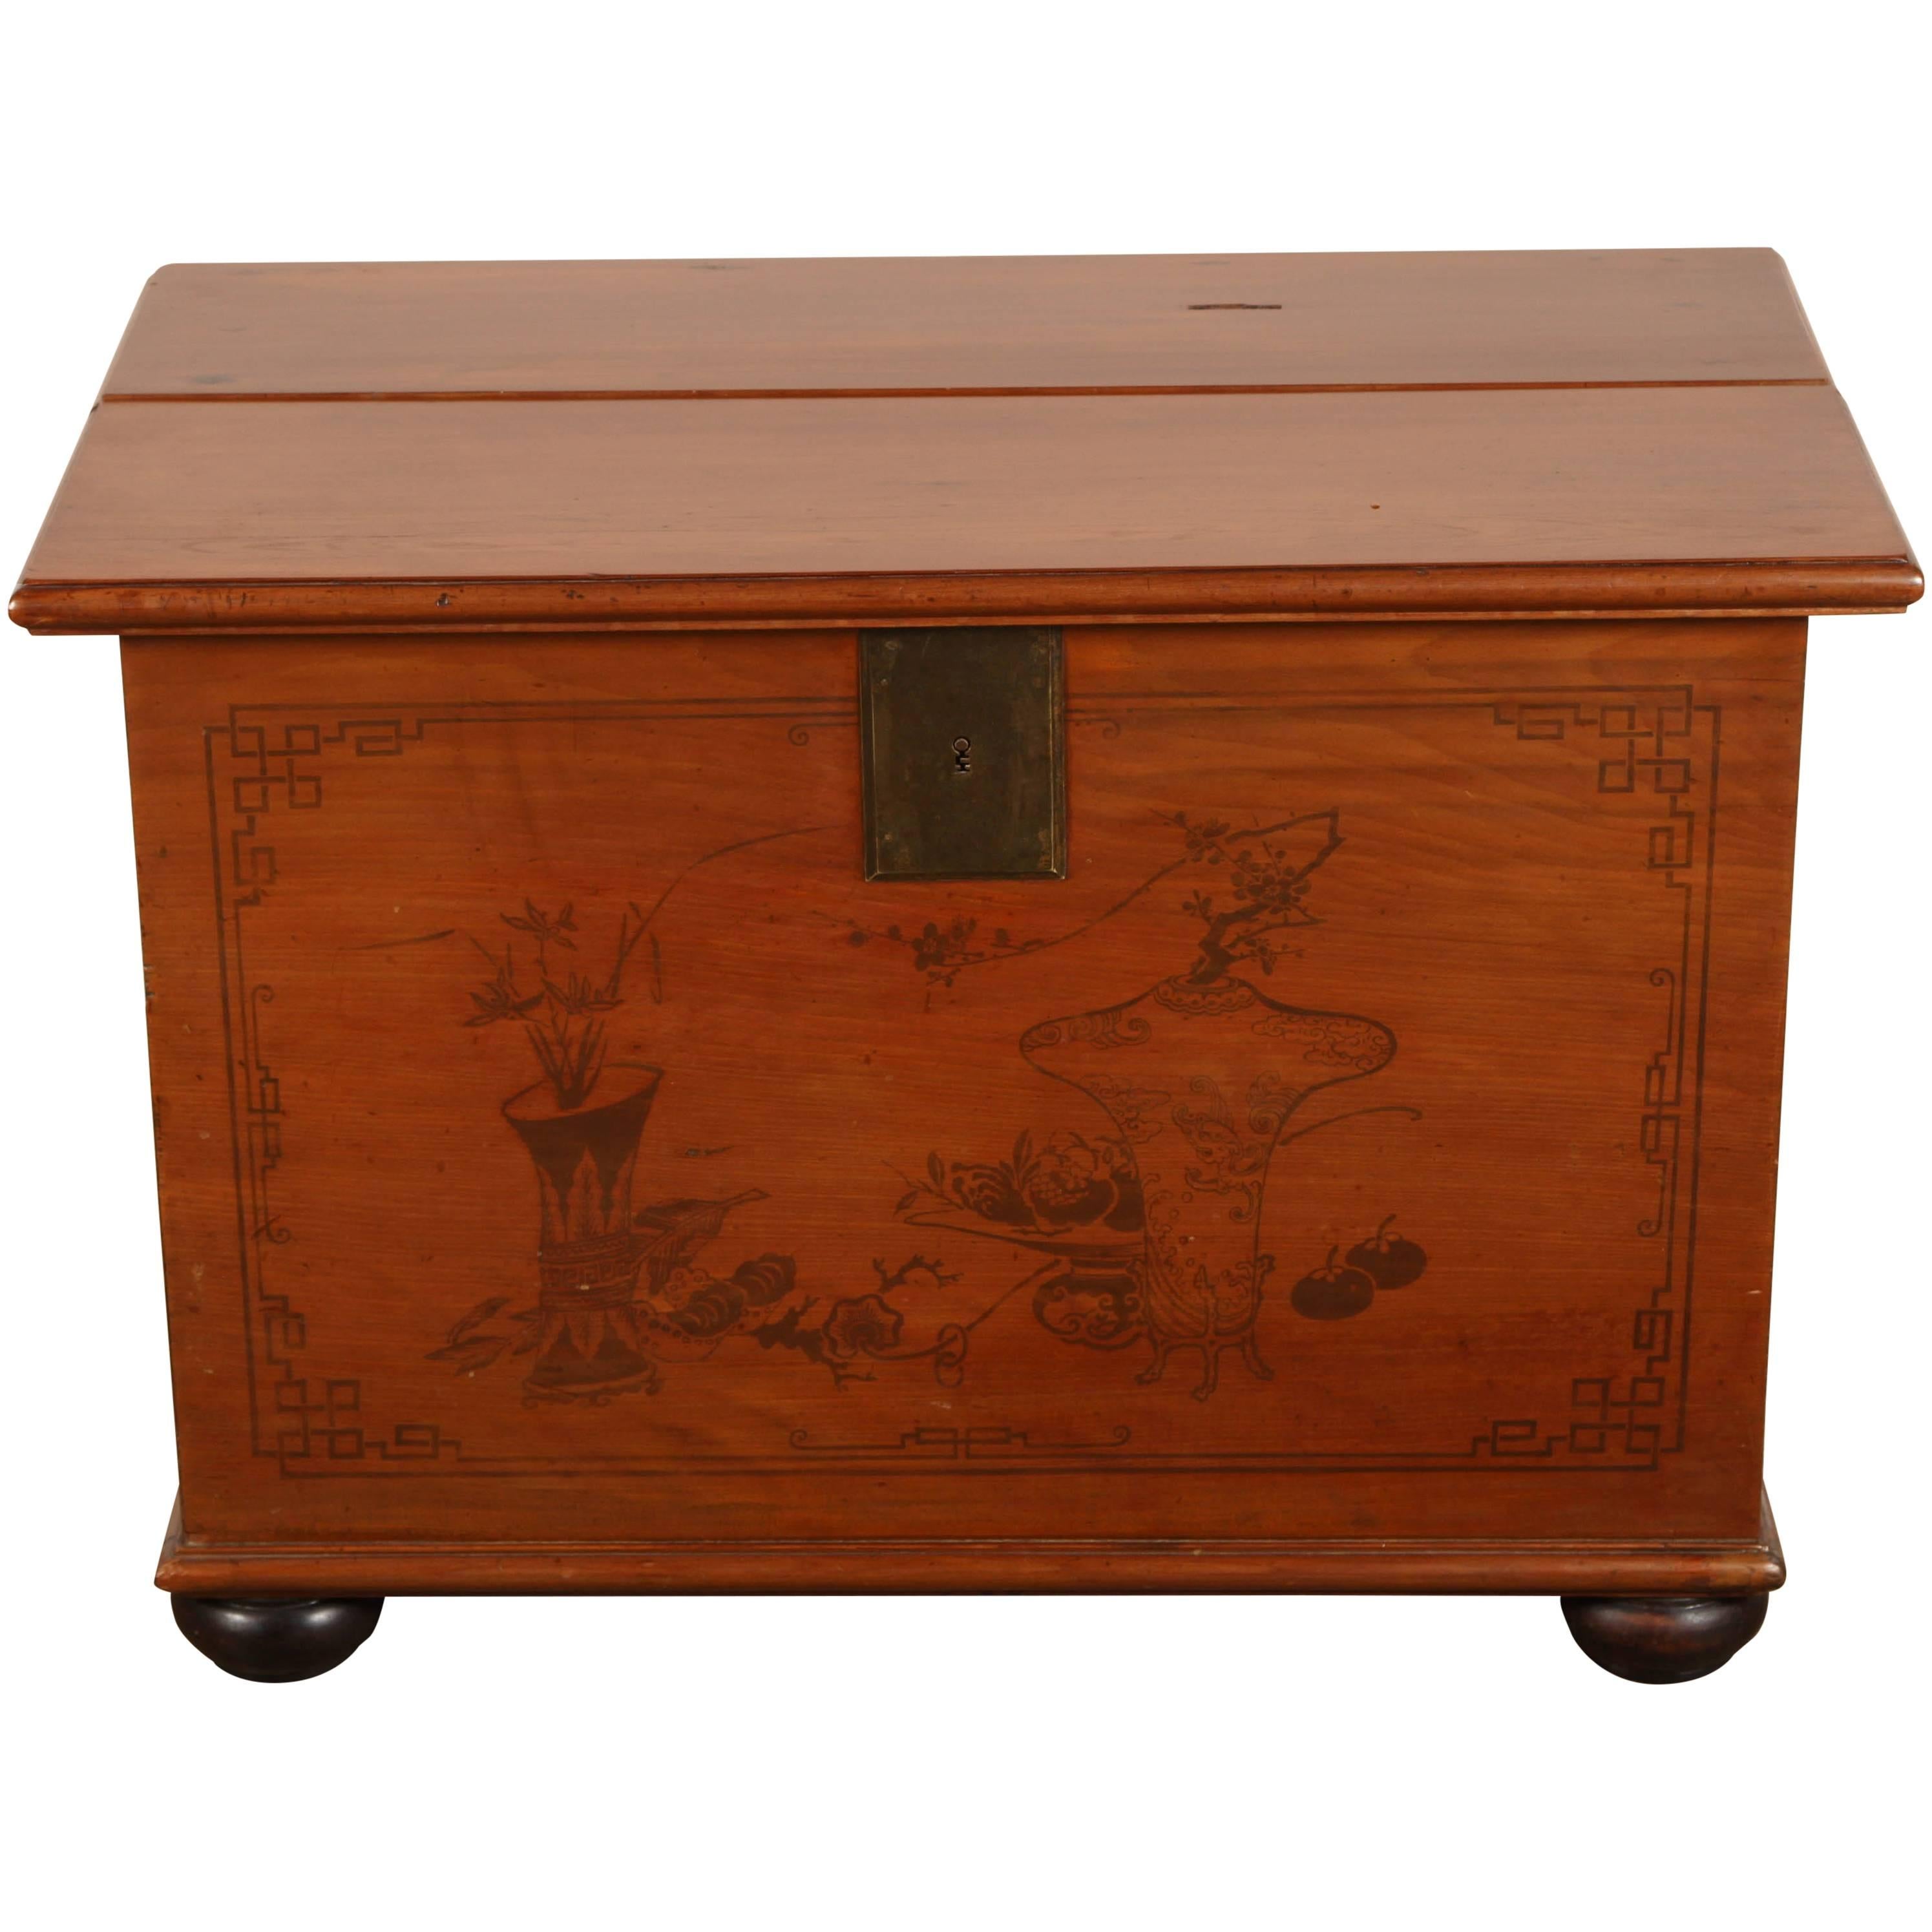 Late 19th Century Painted Chinese Trunk